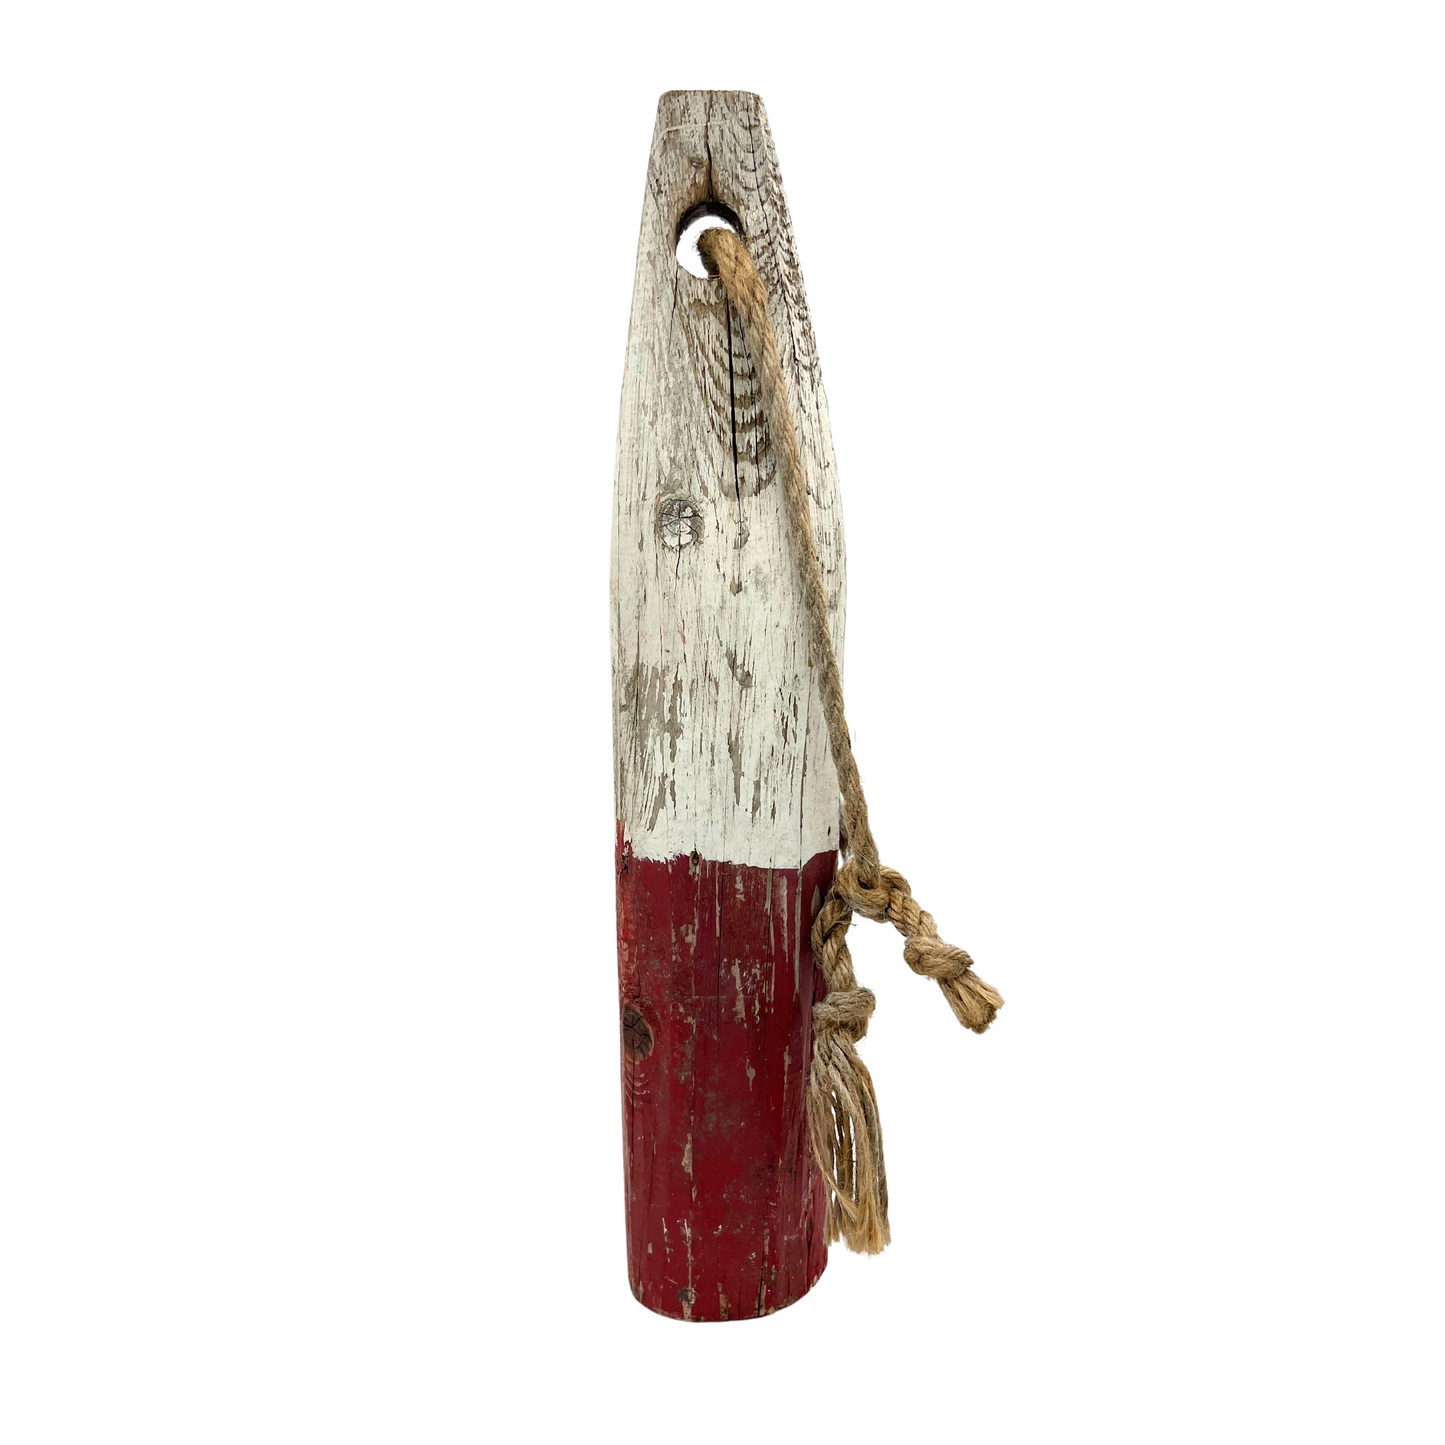 authentic red and white wooden buoy